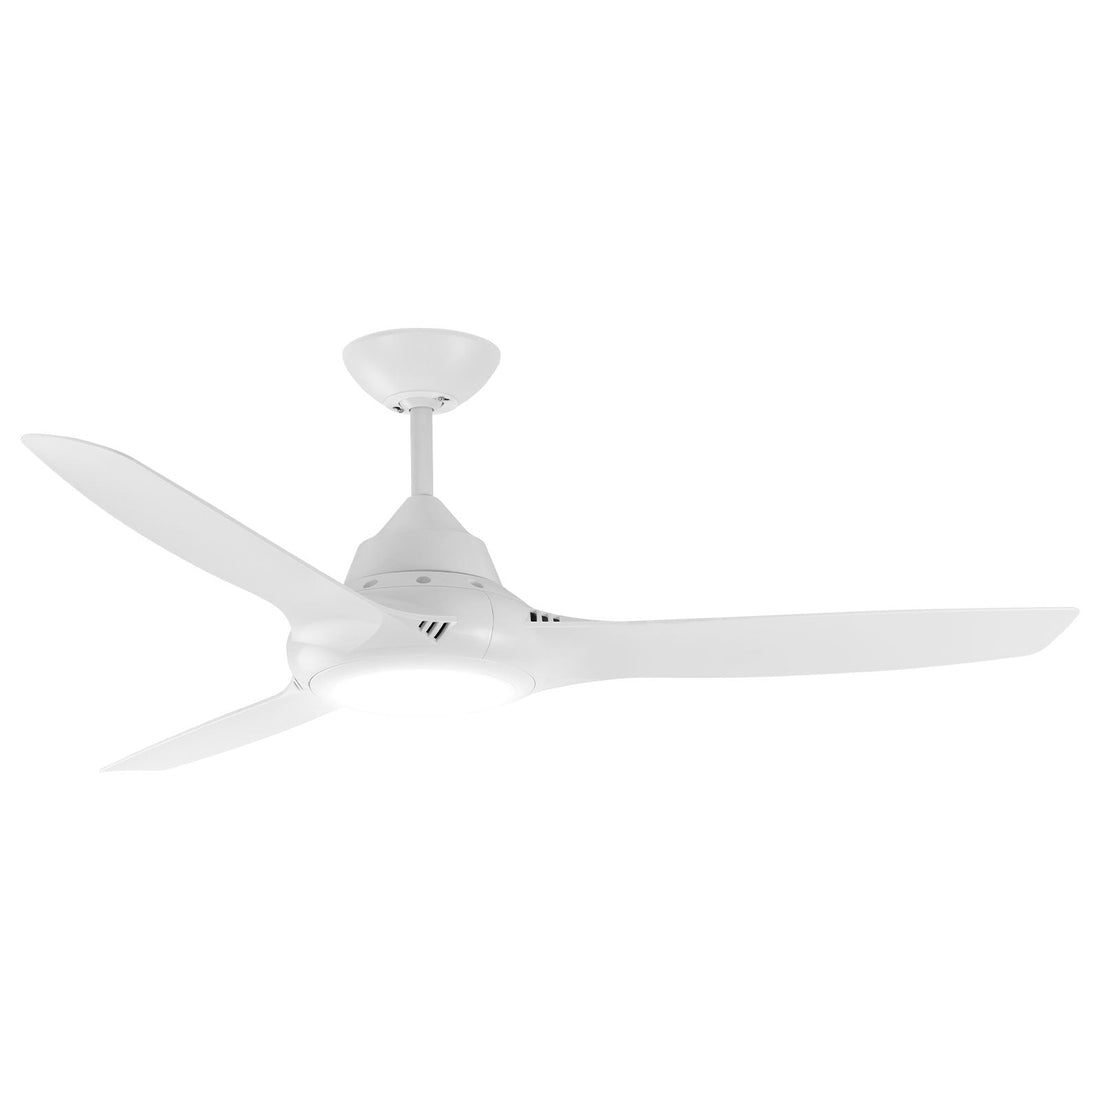 Phaser 50″ AC Ceiling Fan with LED Light Mercator